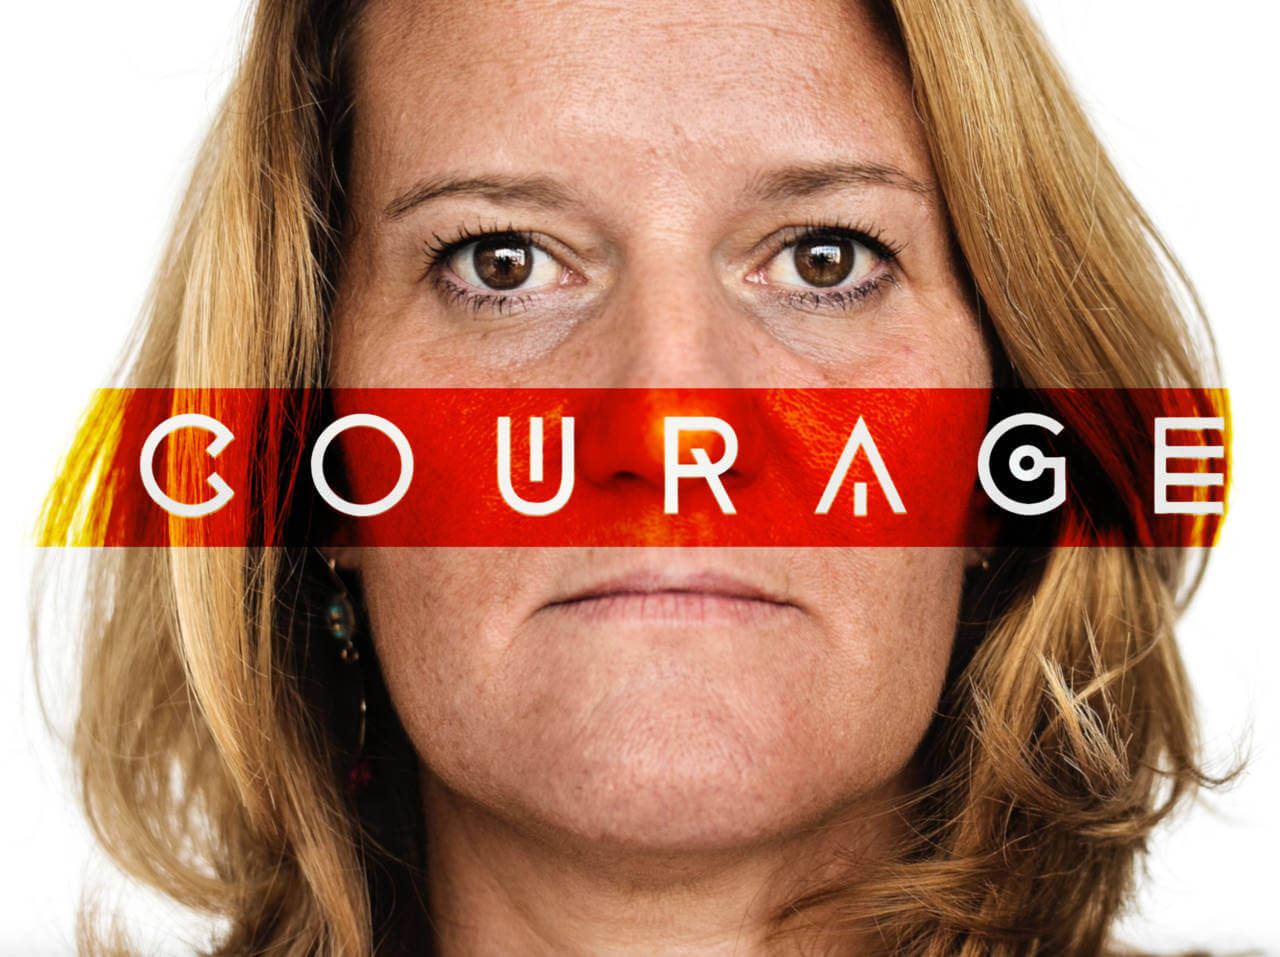 Courage viral video